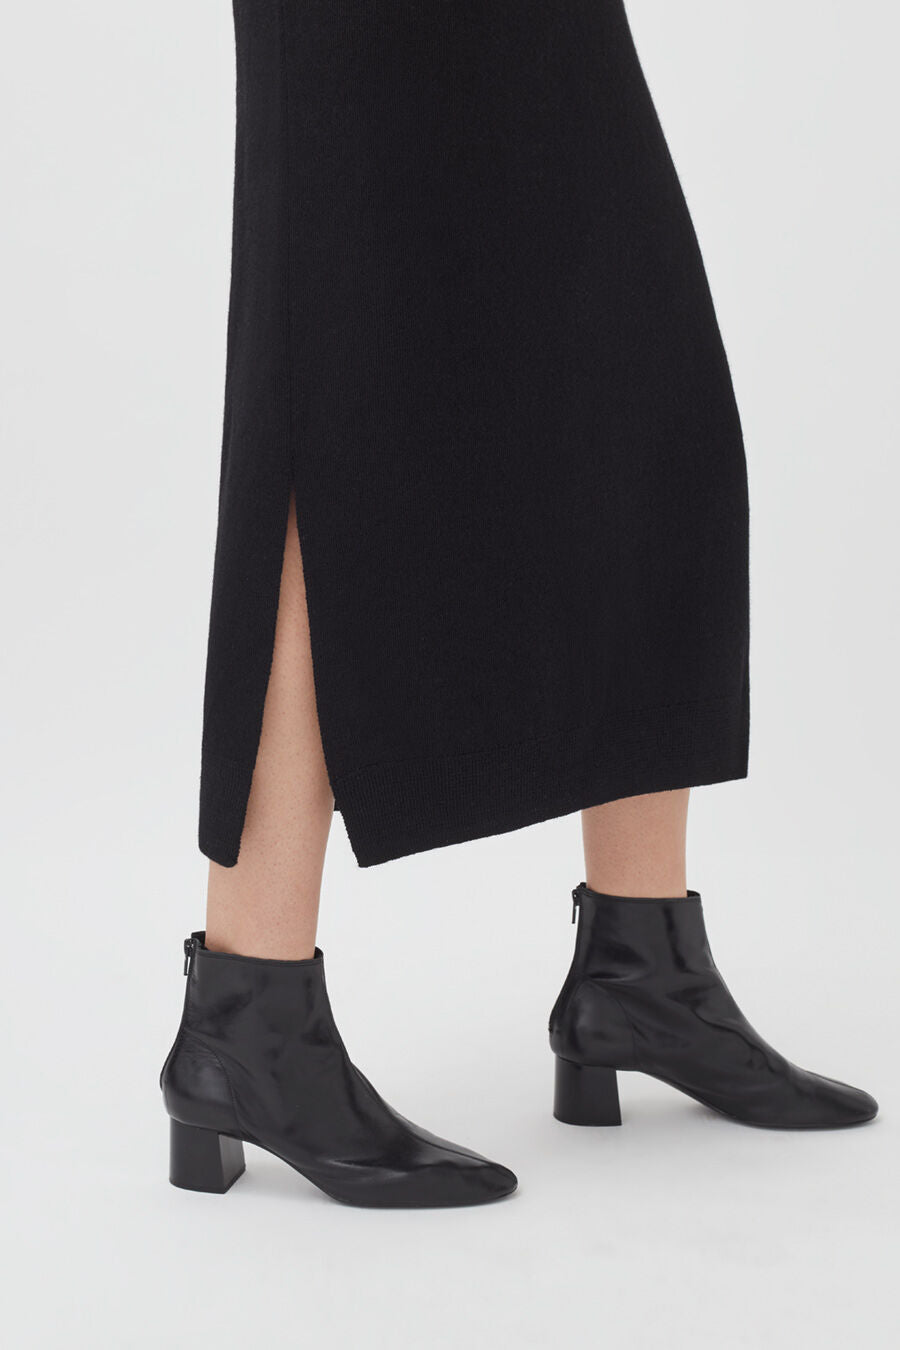 Person wearing ankle boots and a skirt with a slit.